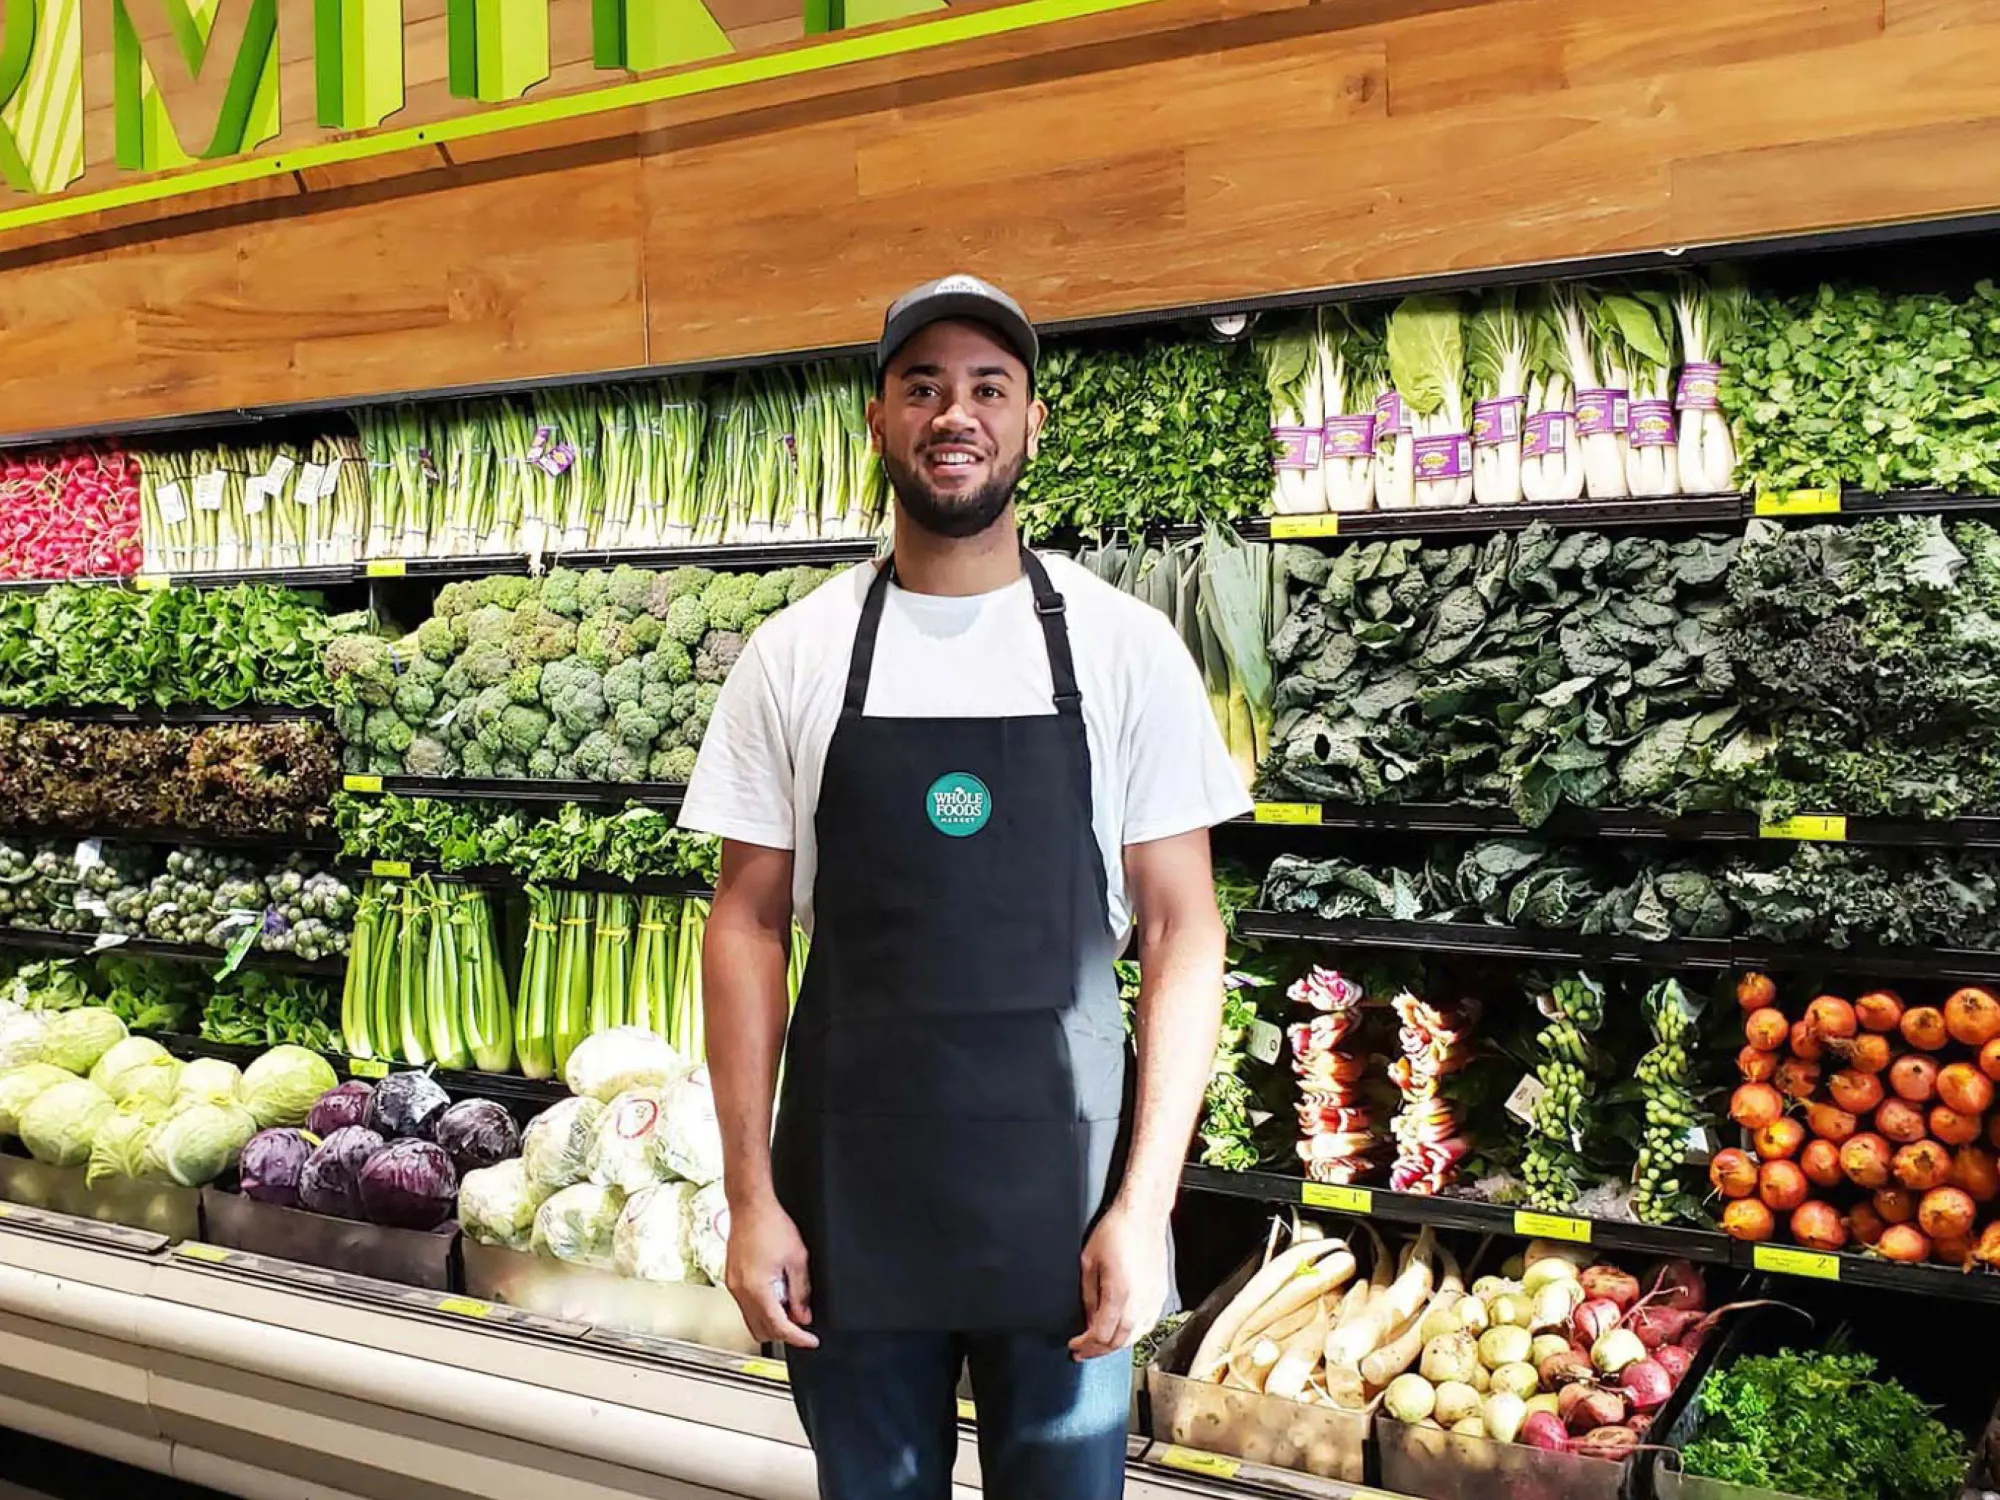 Team Member at Whole Foods Market, London